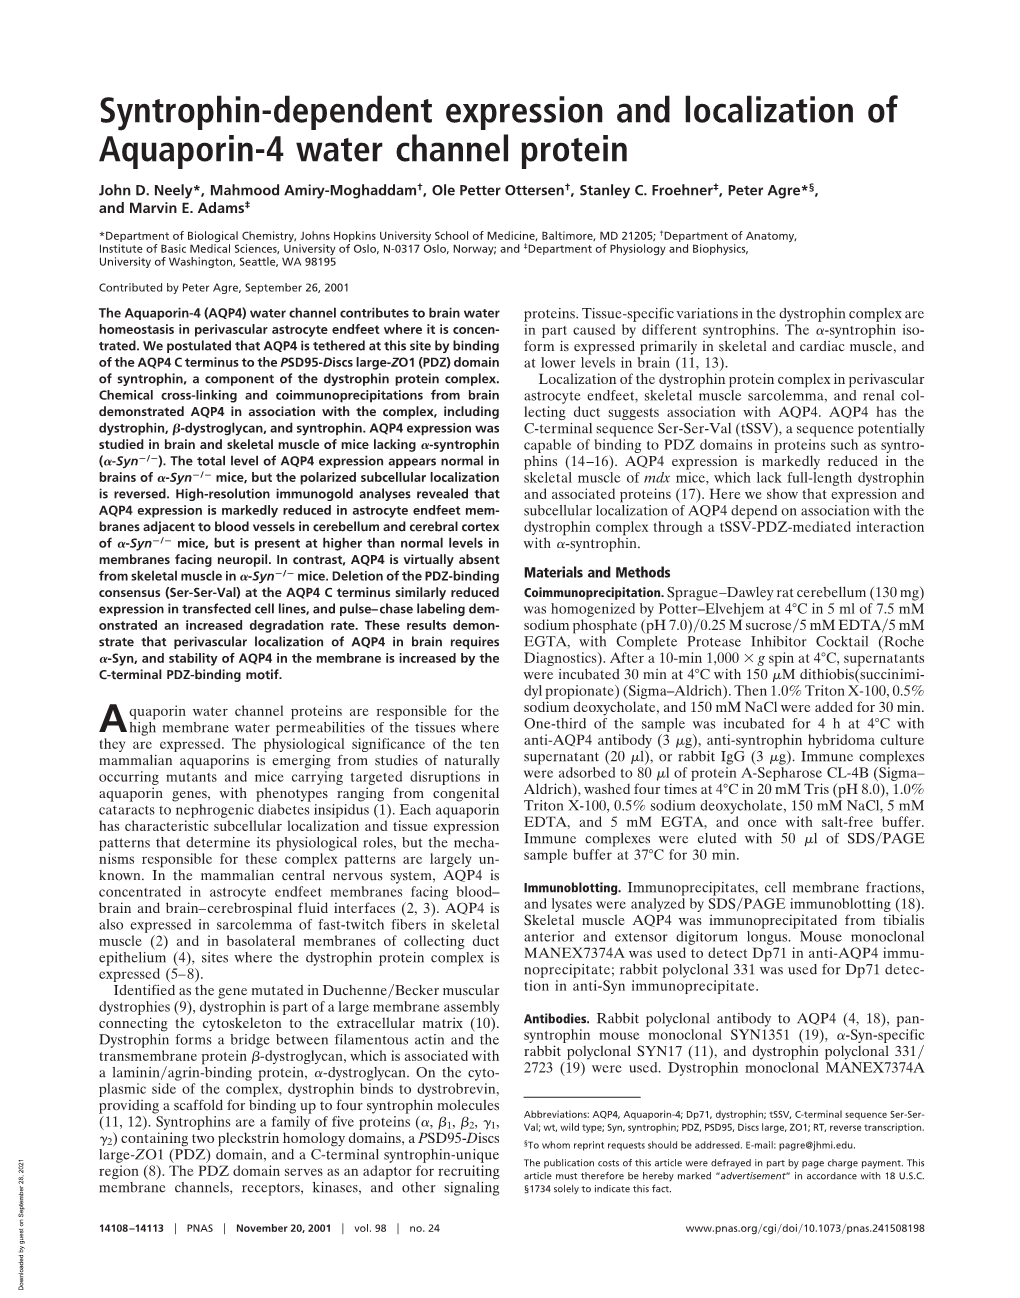 Syntrophin-Dependent Expression and Localization of Aquaporin-4 Water Channel Protein